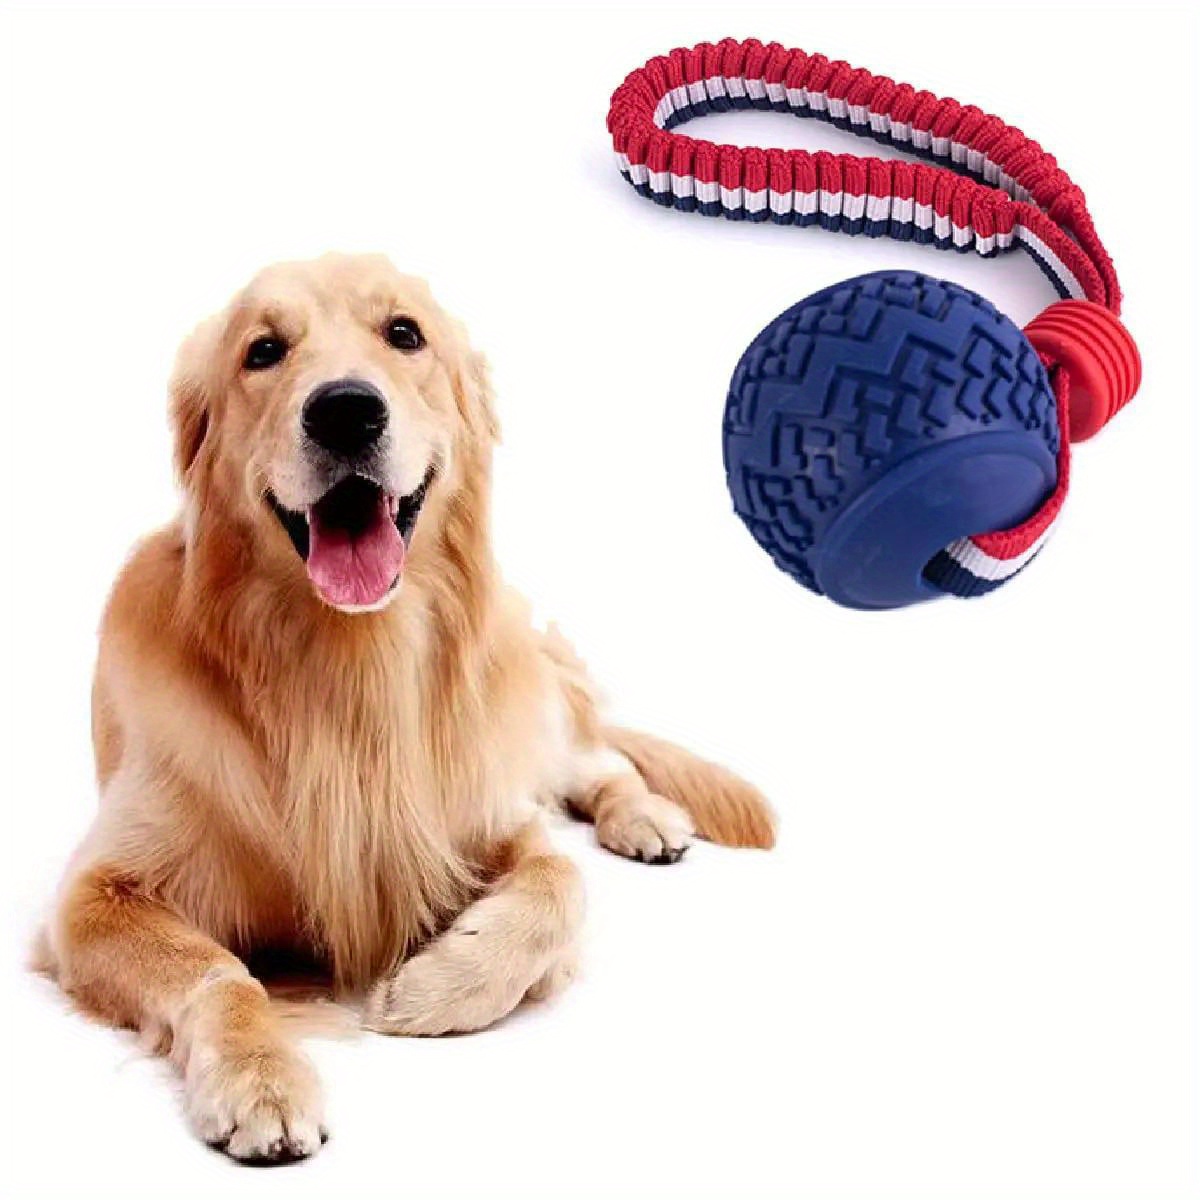 

Silicone Dog Chew Toy Set – Bite Resistant, Teeth Cleaning Rope Knot Balls – Medium Breed Molar & Interactive Training Toys With String – Durable Pet Dental Health Care